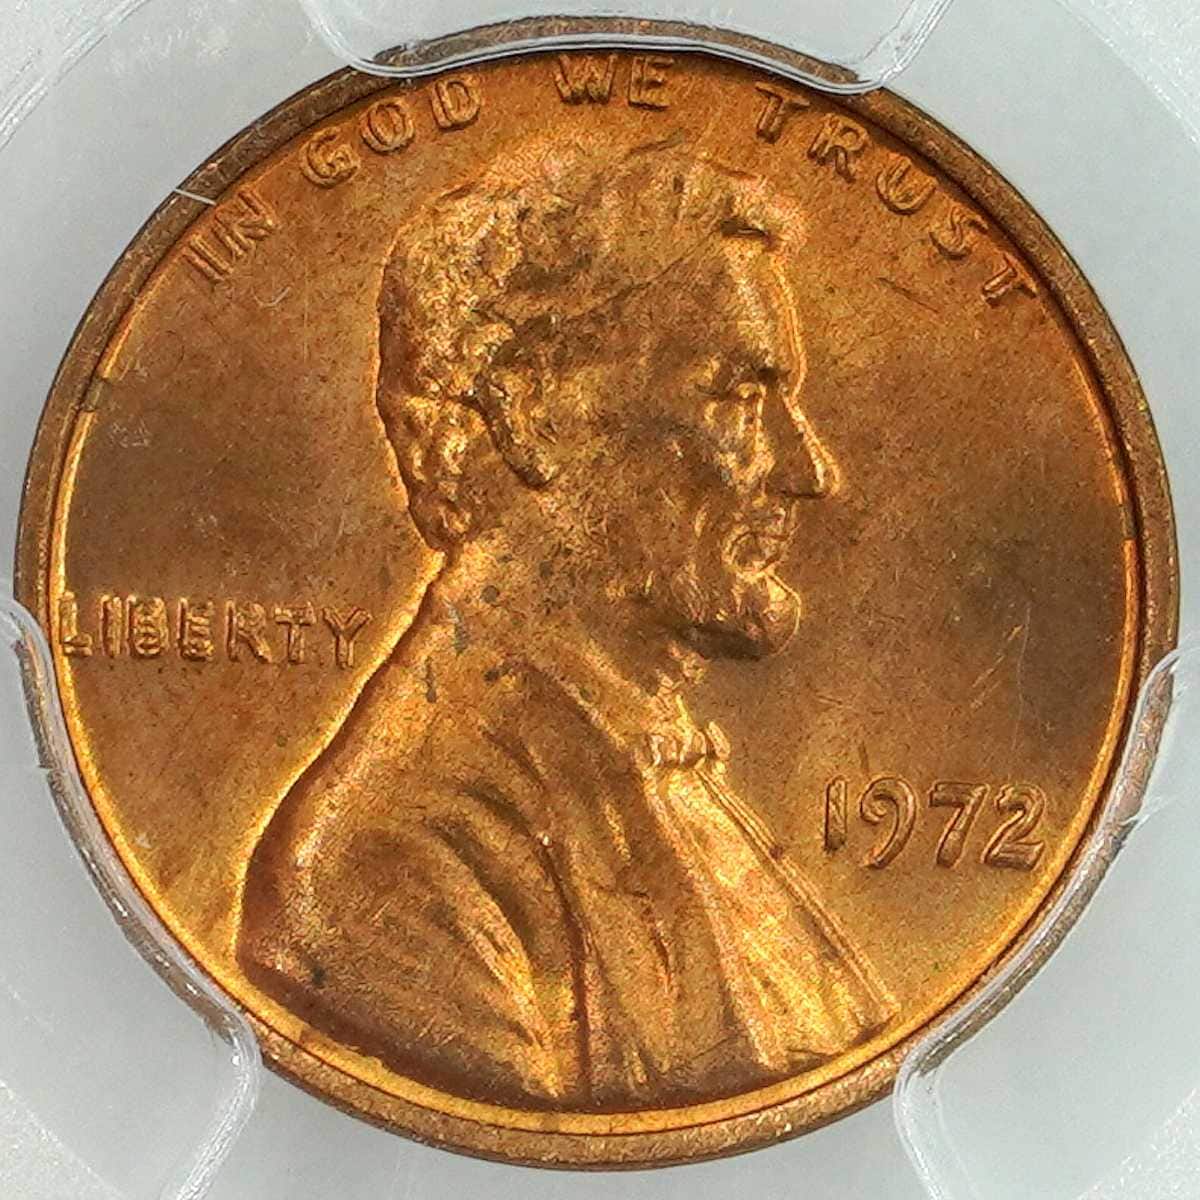 1972 PCGS MS64RD Doubled Die Obverse Lincoln Memorial Penny value